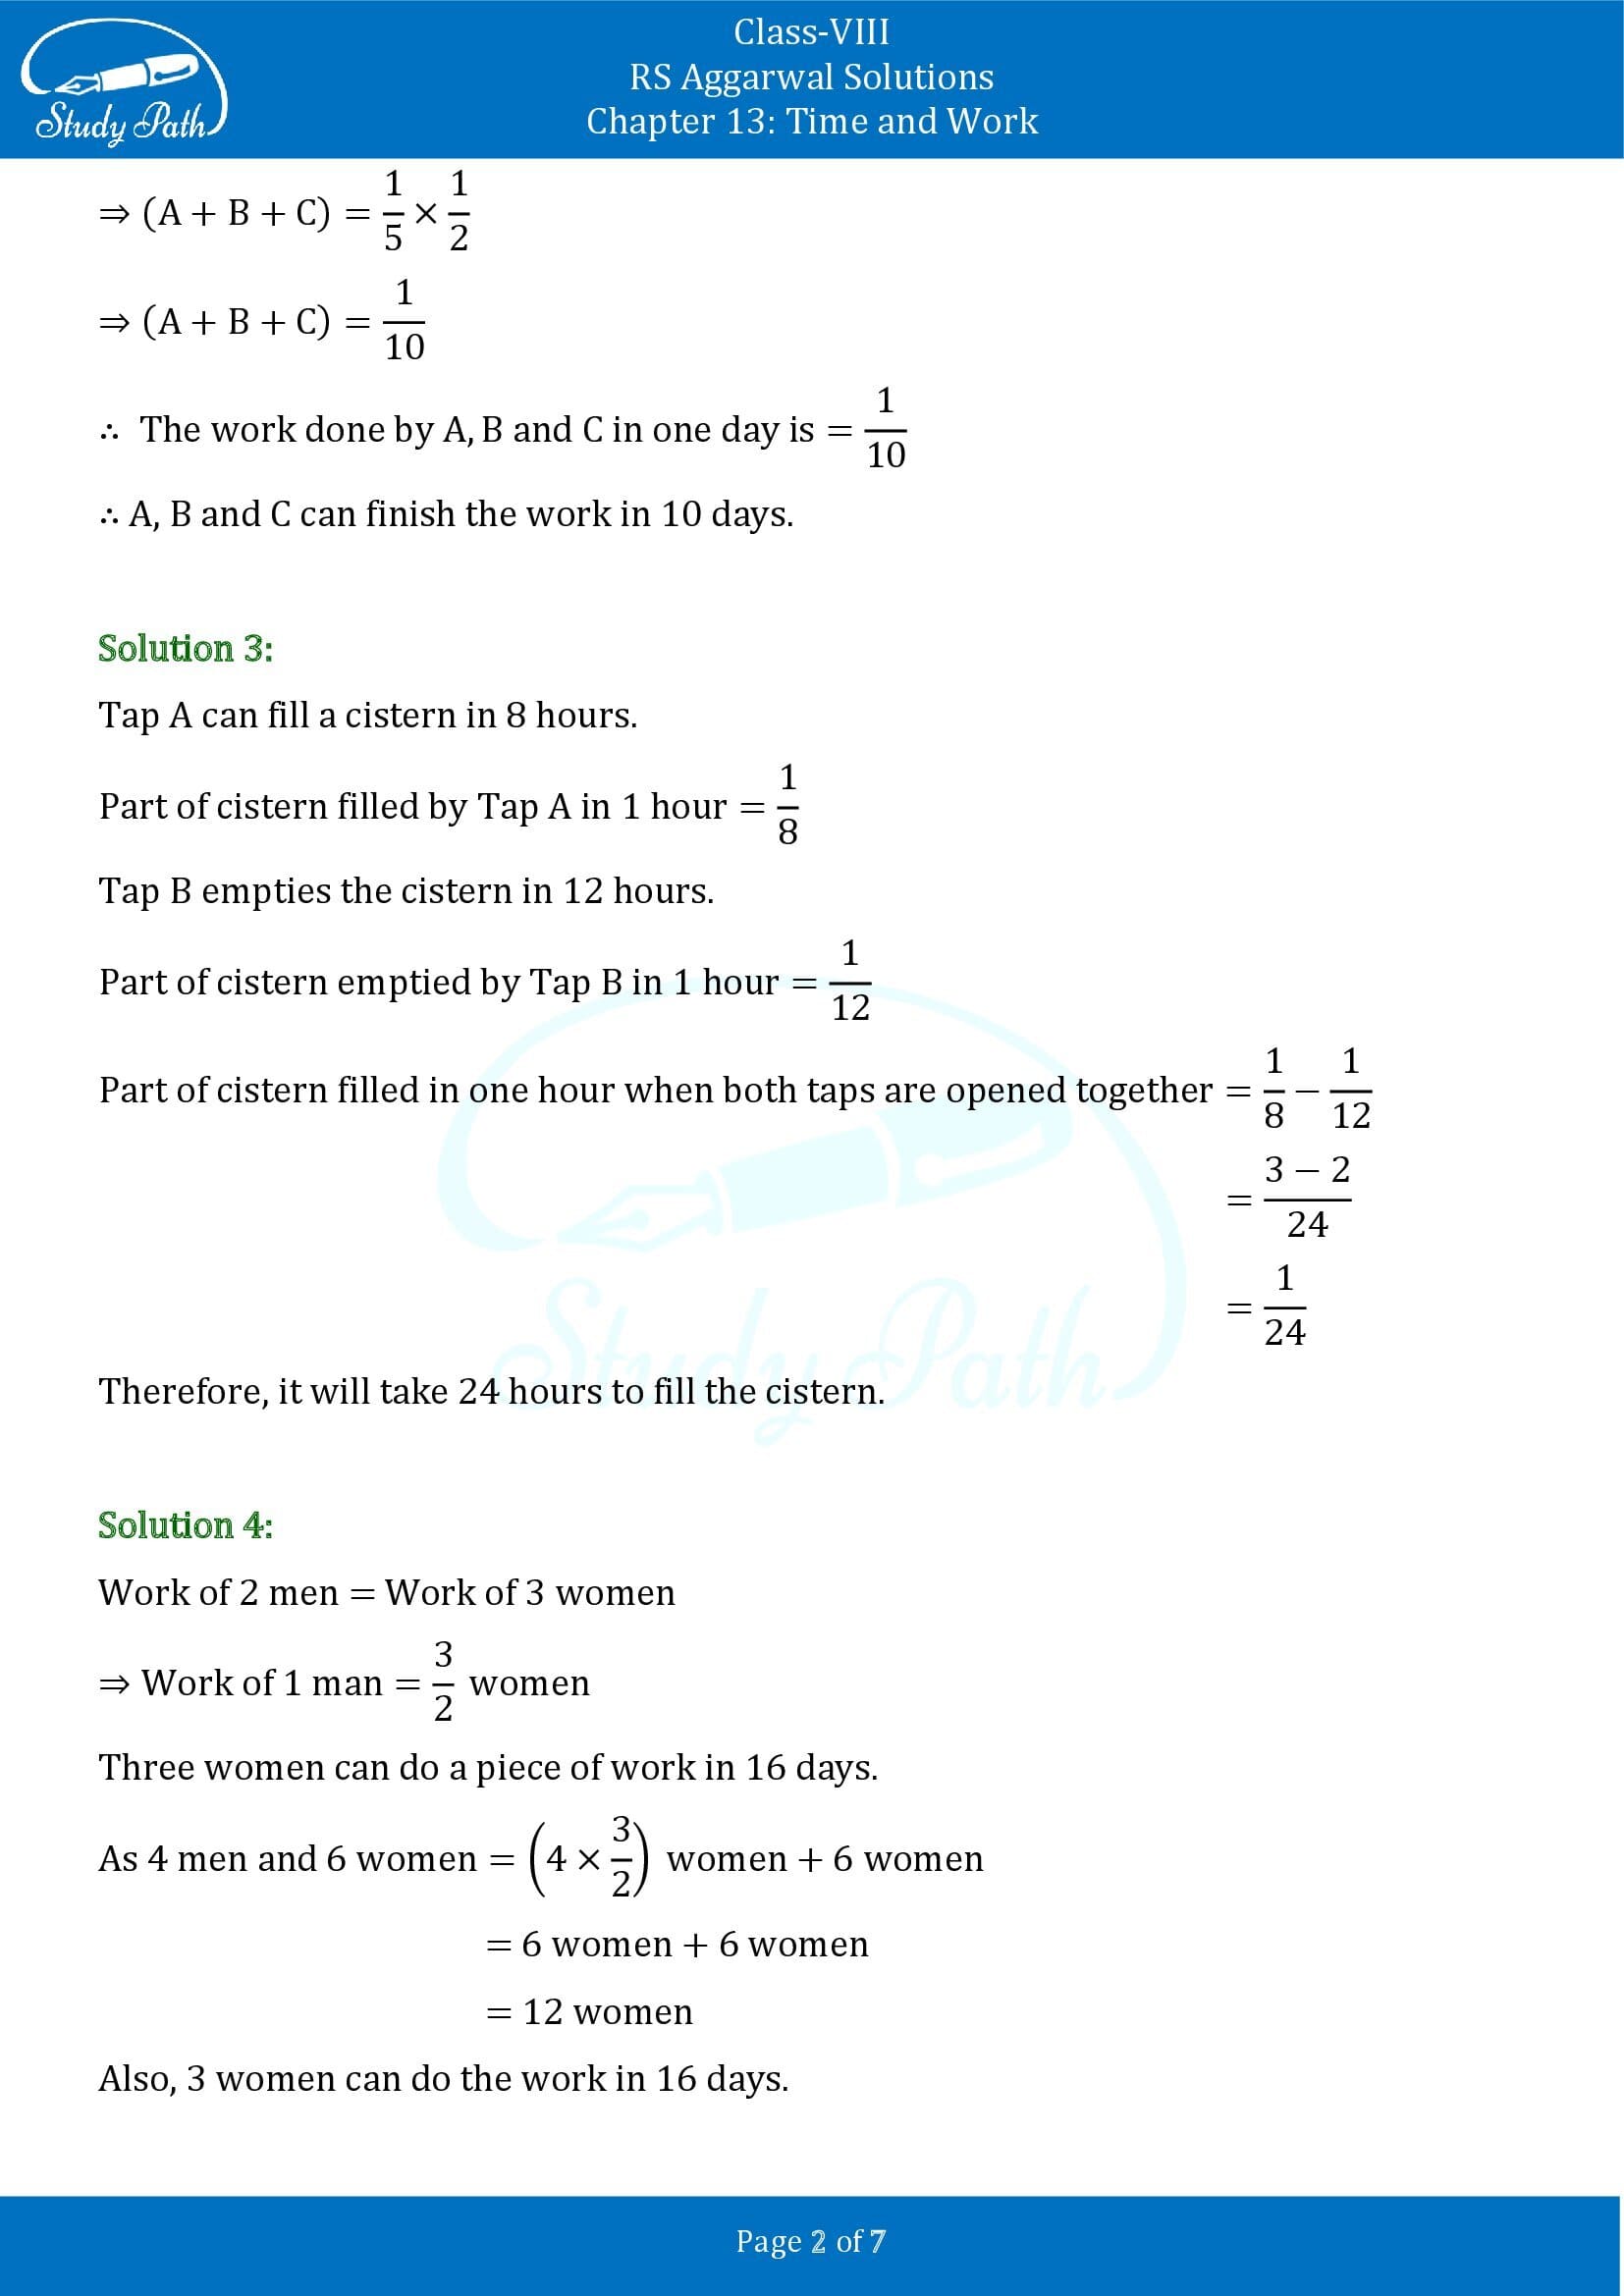 RS Aggarwal Solutions Class 8 Chapter 13 Time and Work Test Paper 00002